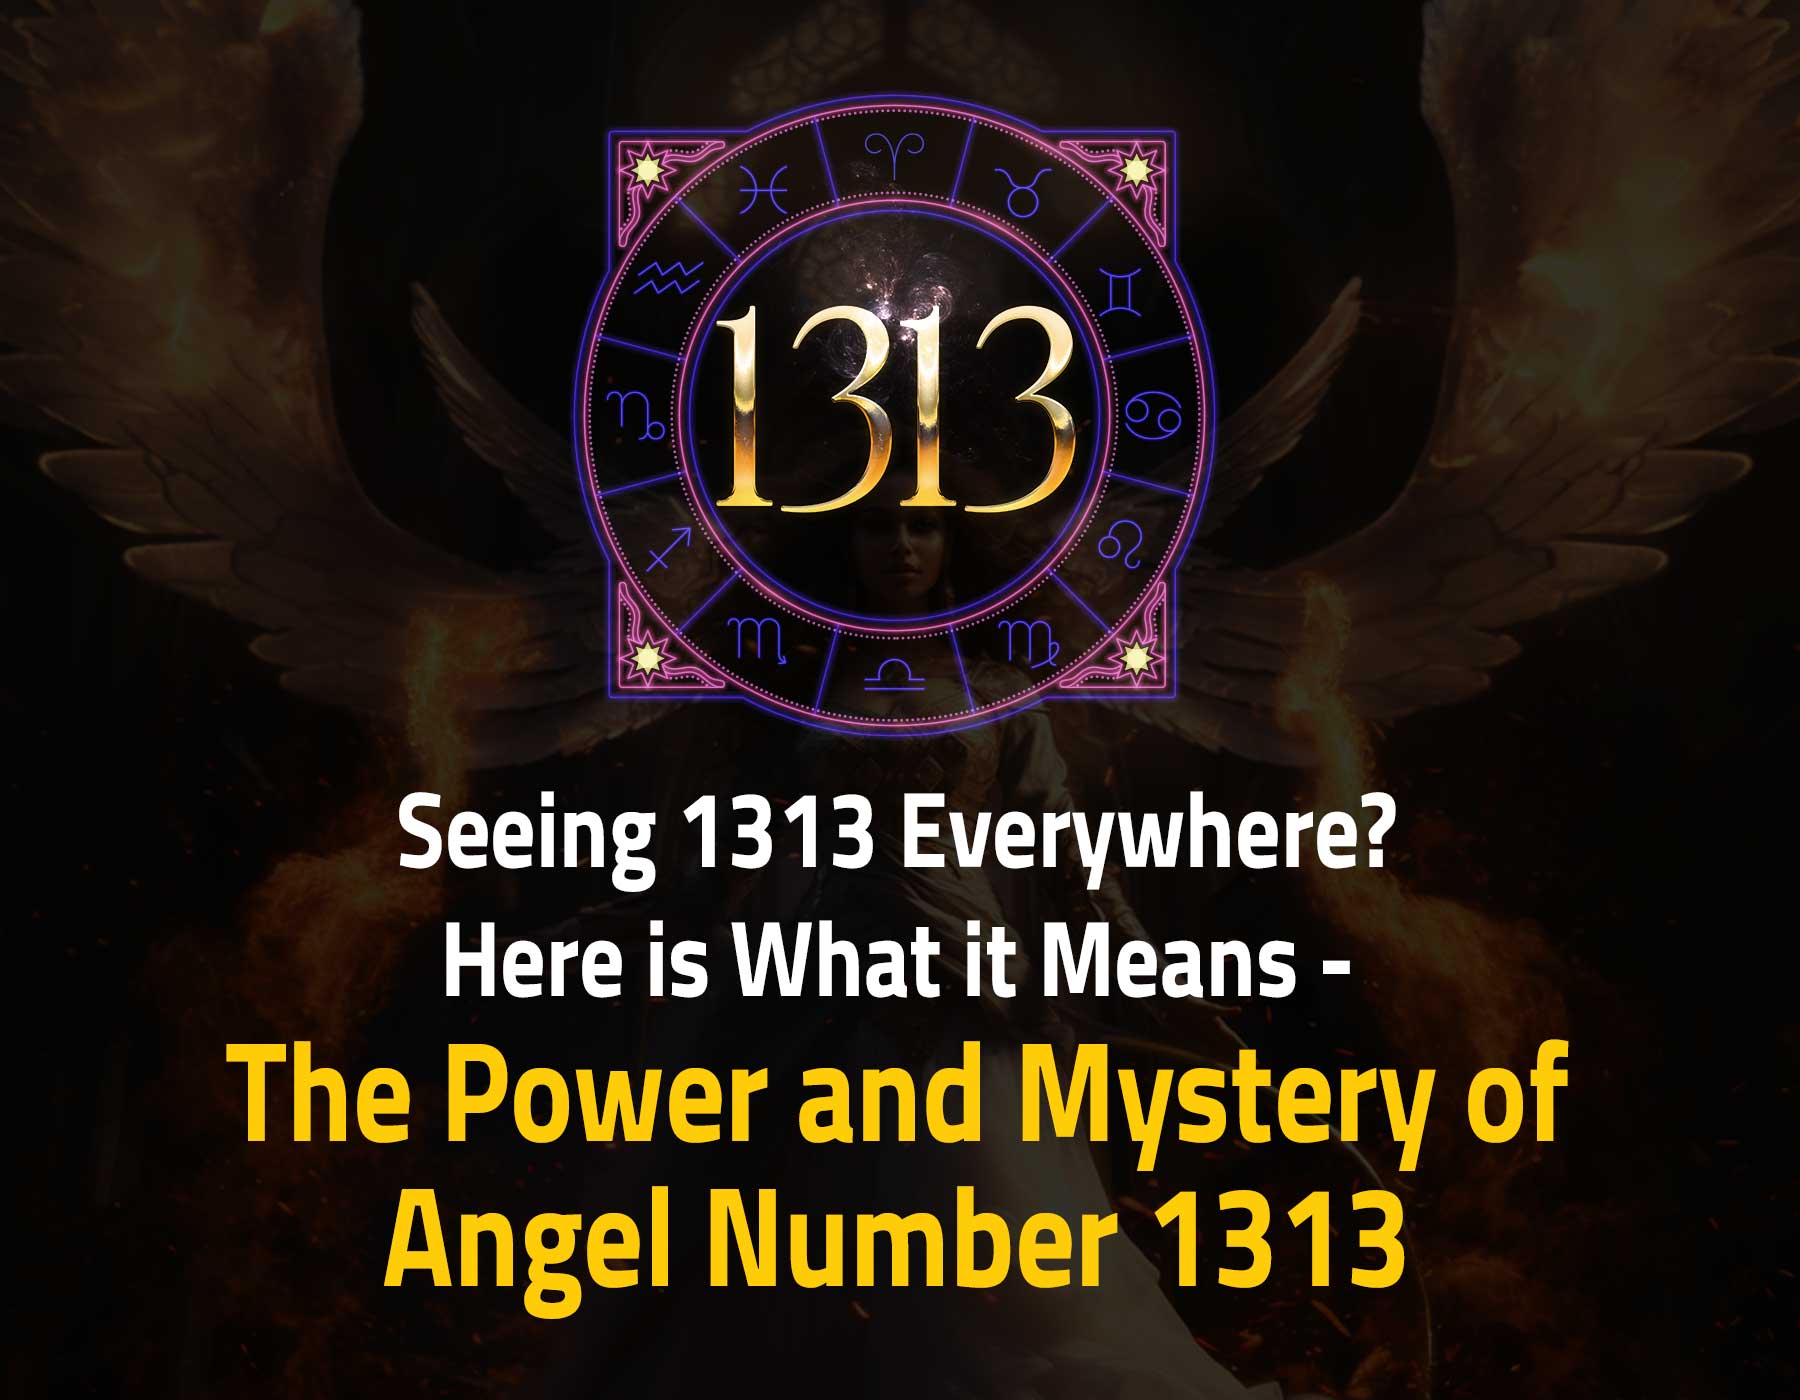 Seeing 1313 Everywhere? Here is What it Means - The Power and Mystery of Angel Number 1313